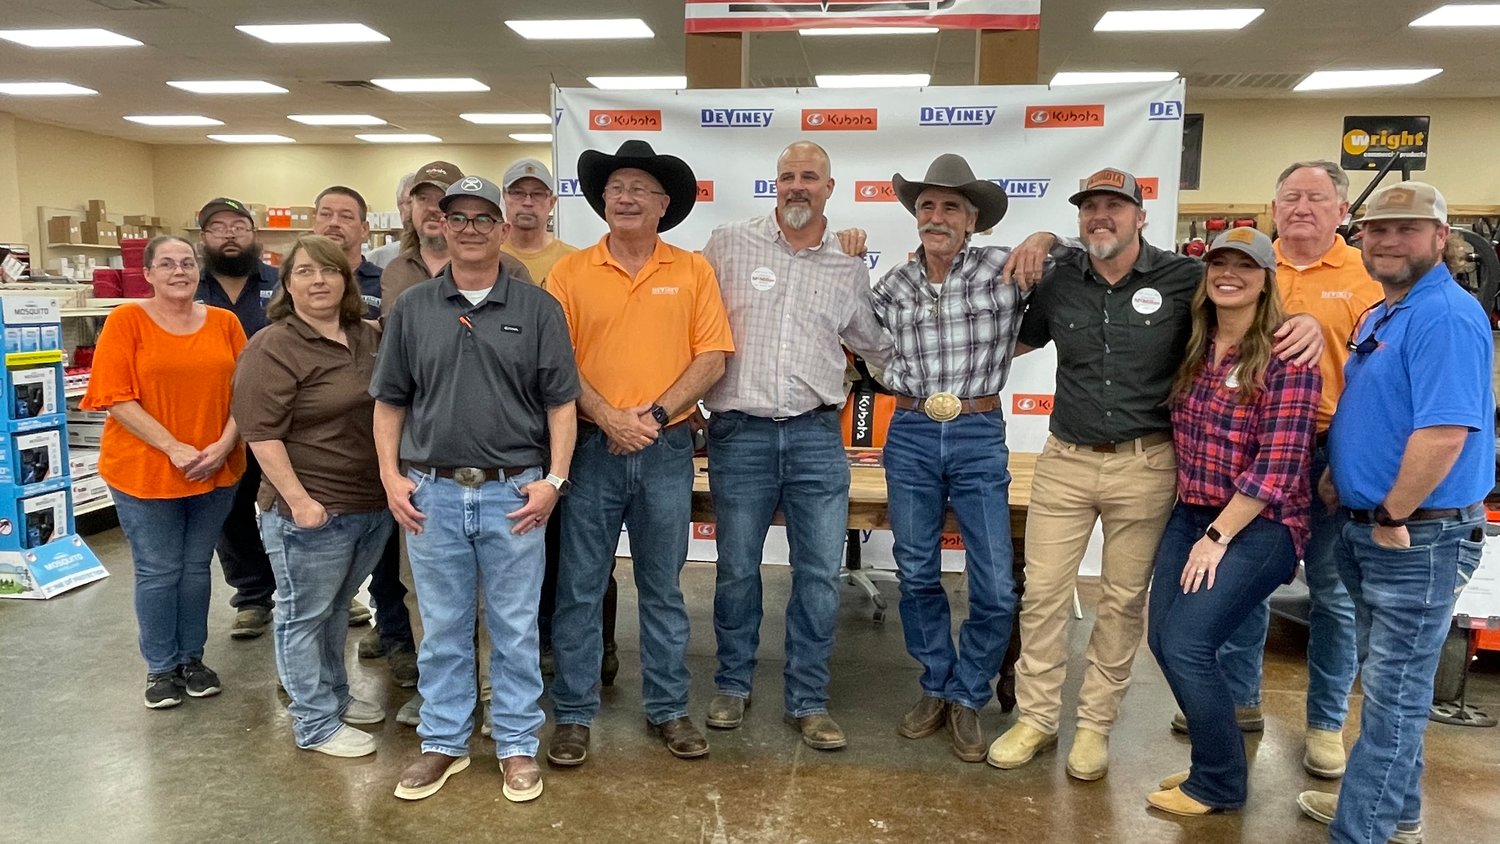 “Yellowstone” star Forrie Smith, fifth from right, visits with fans at Deviney Rental and Equipment in Gluckstadt last week before the Dixie National Rodeo.